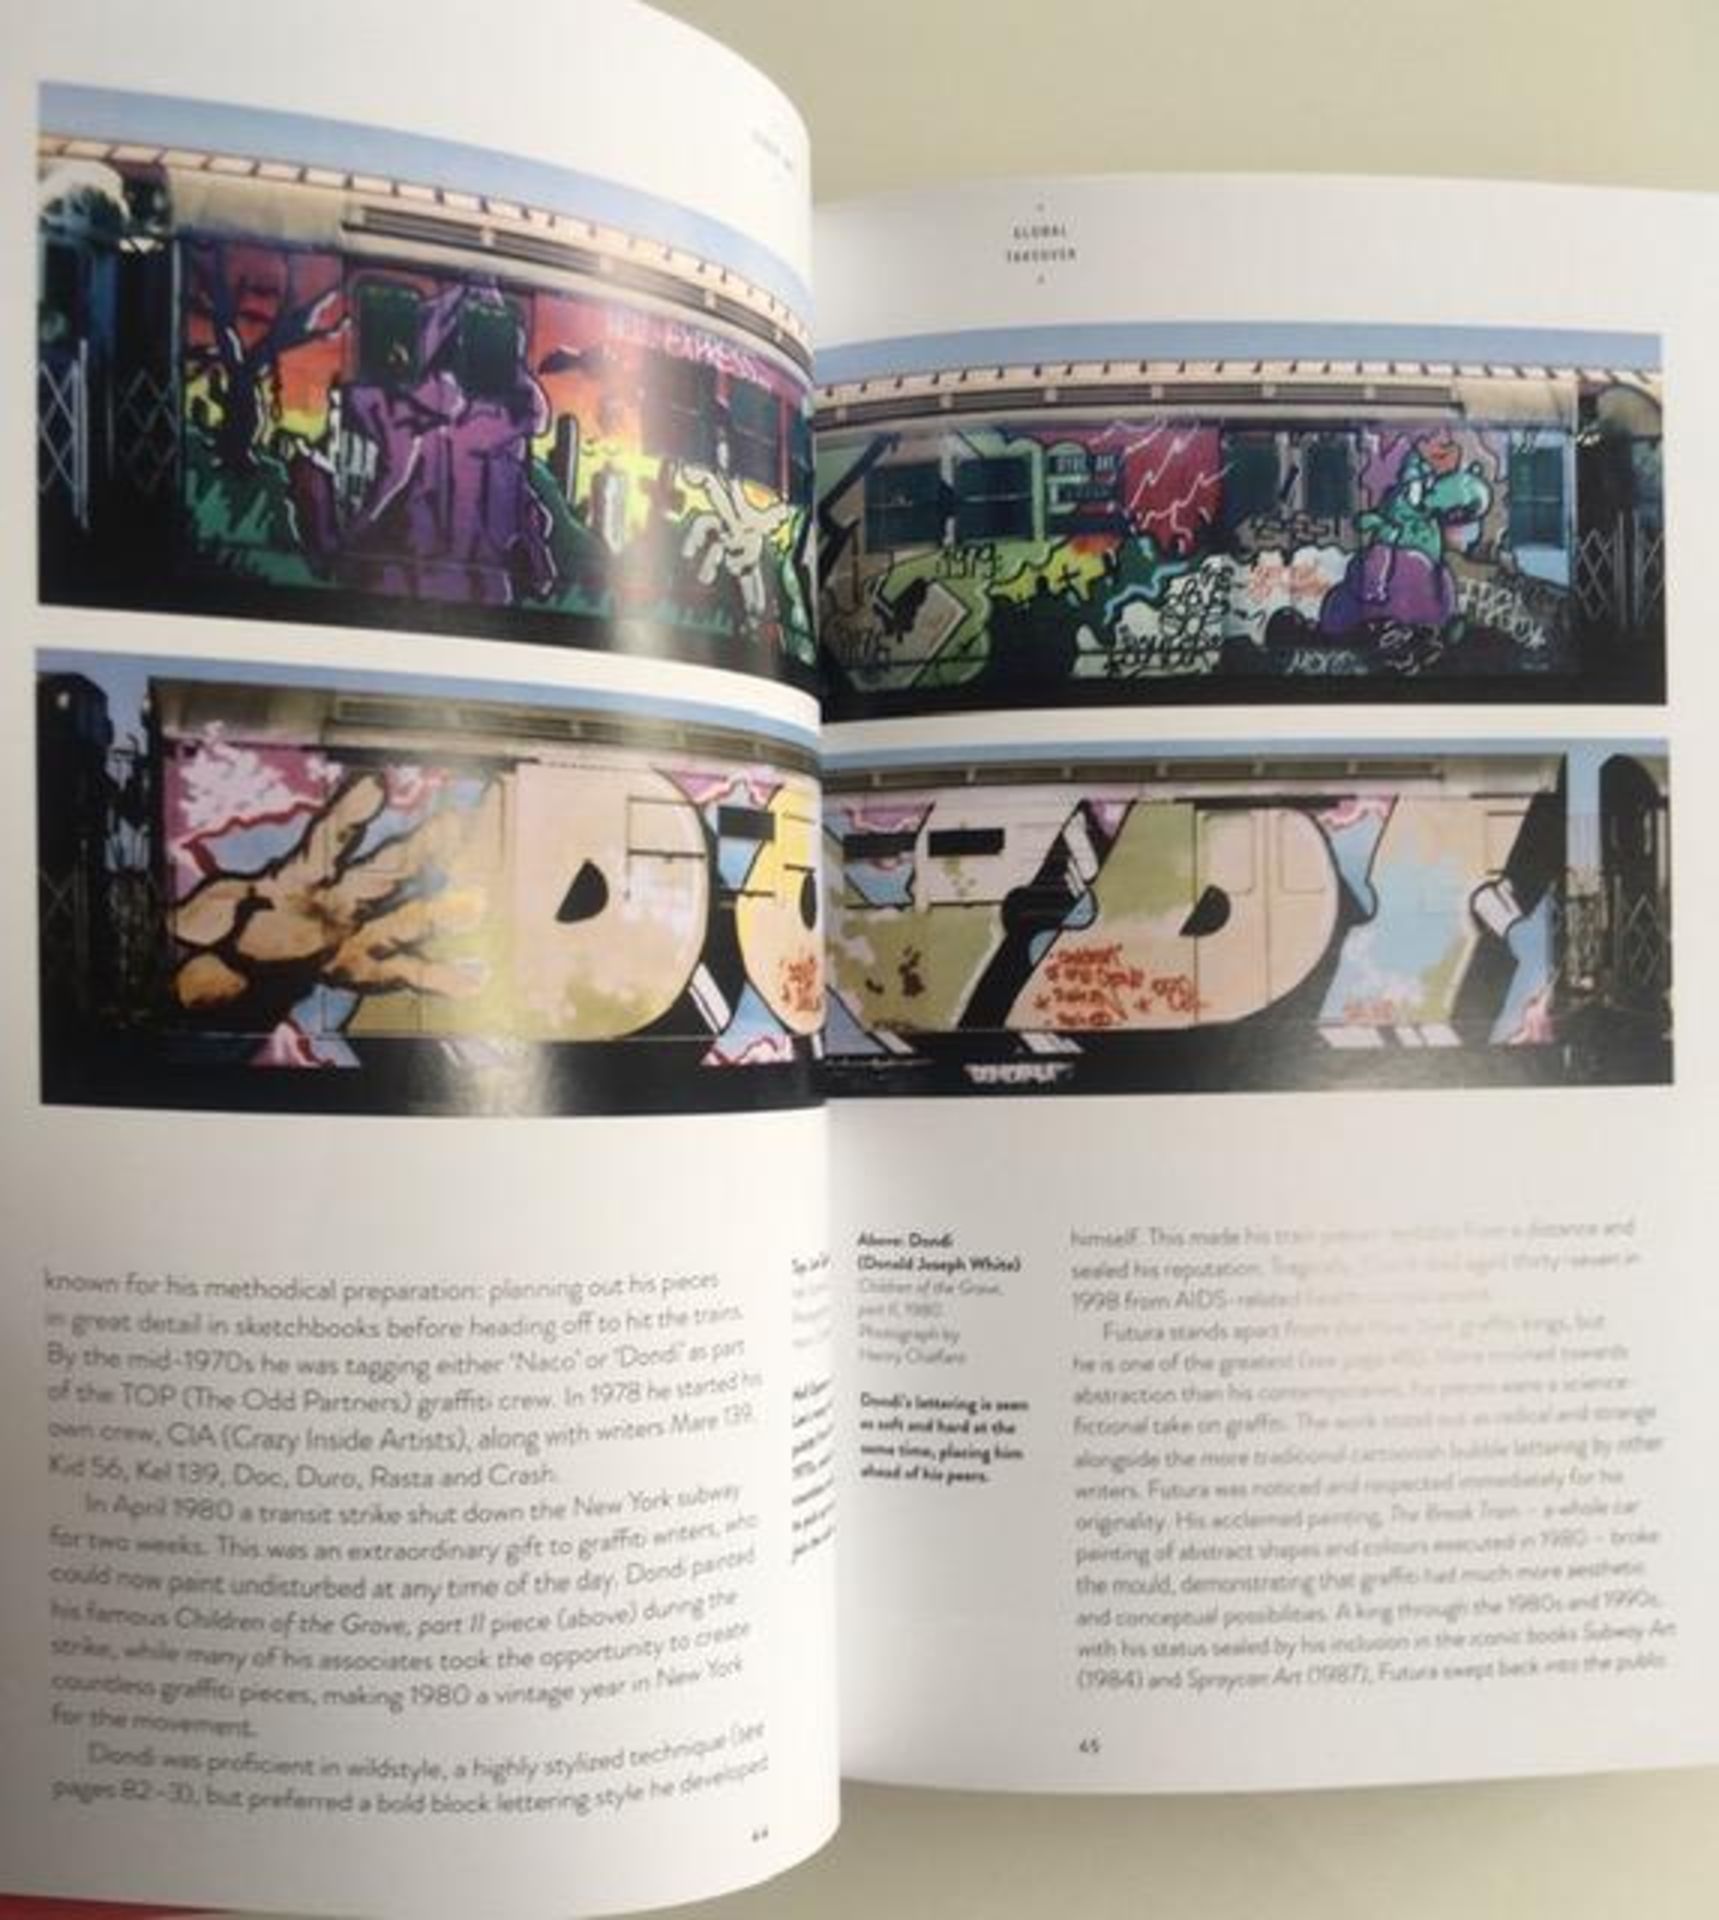 DFace ‘Street Art’ by Simon Armstrong, Hip Hop to Sotheby's, USA to UK, Worldwide, 1st Edition, 2... - Image 8 of 23